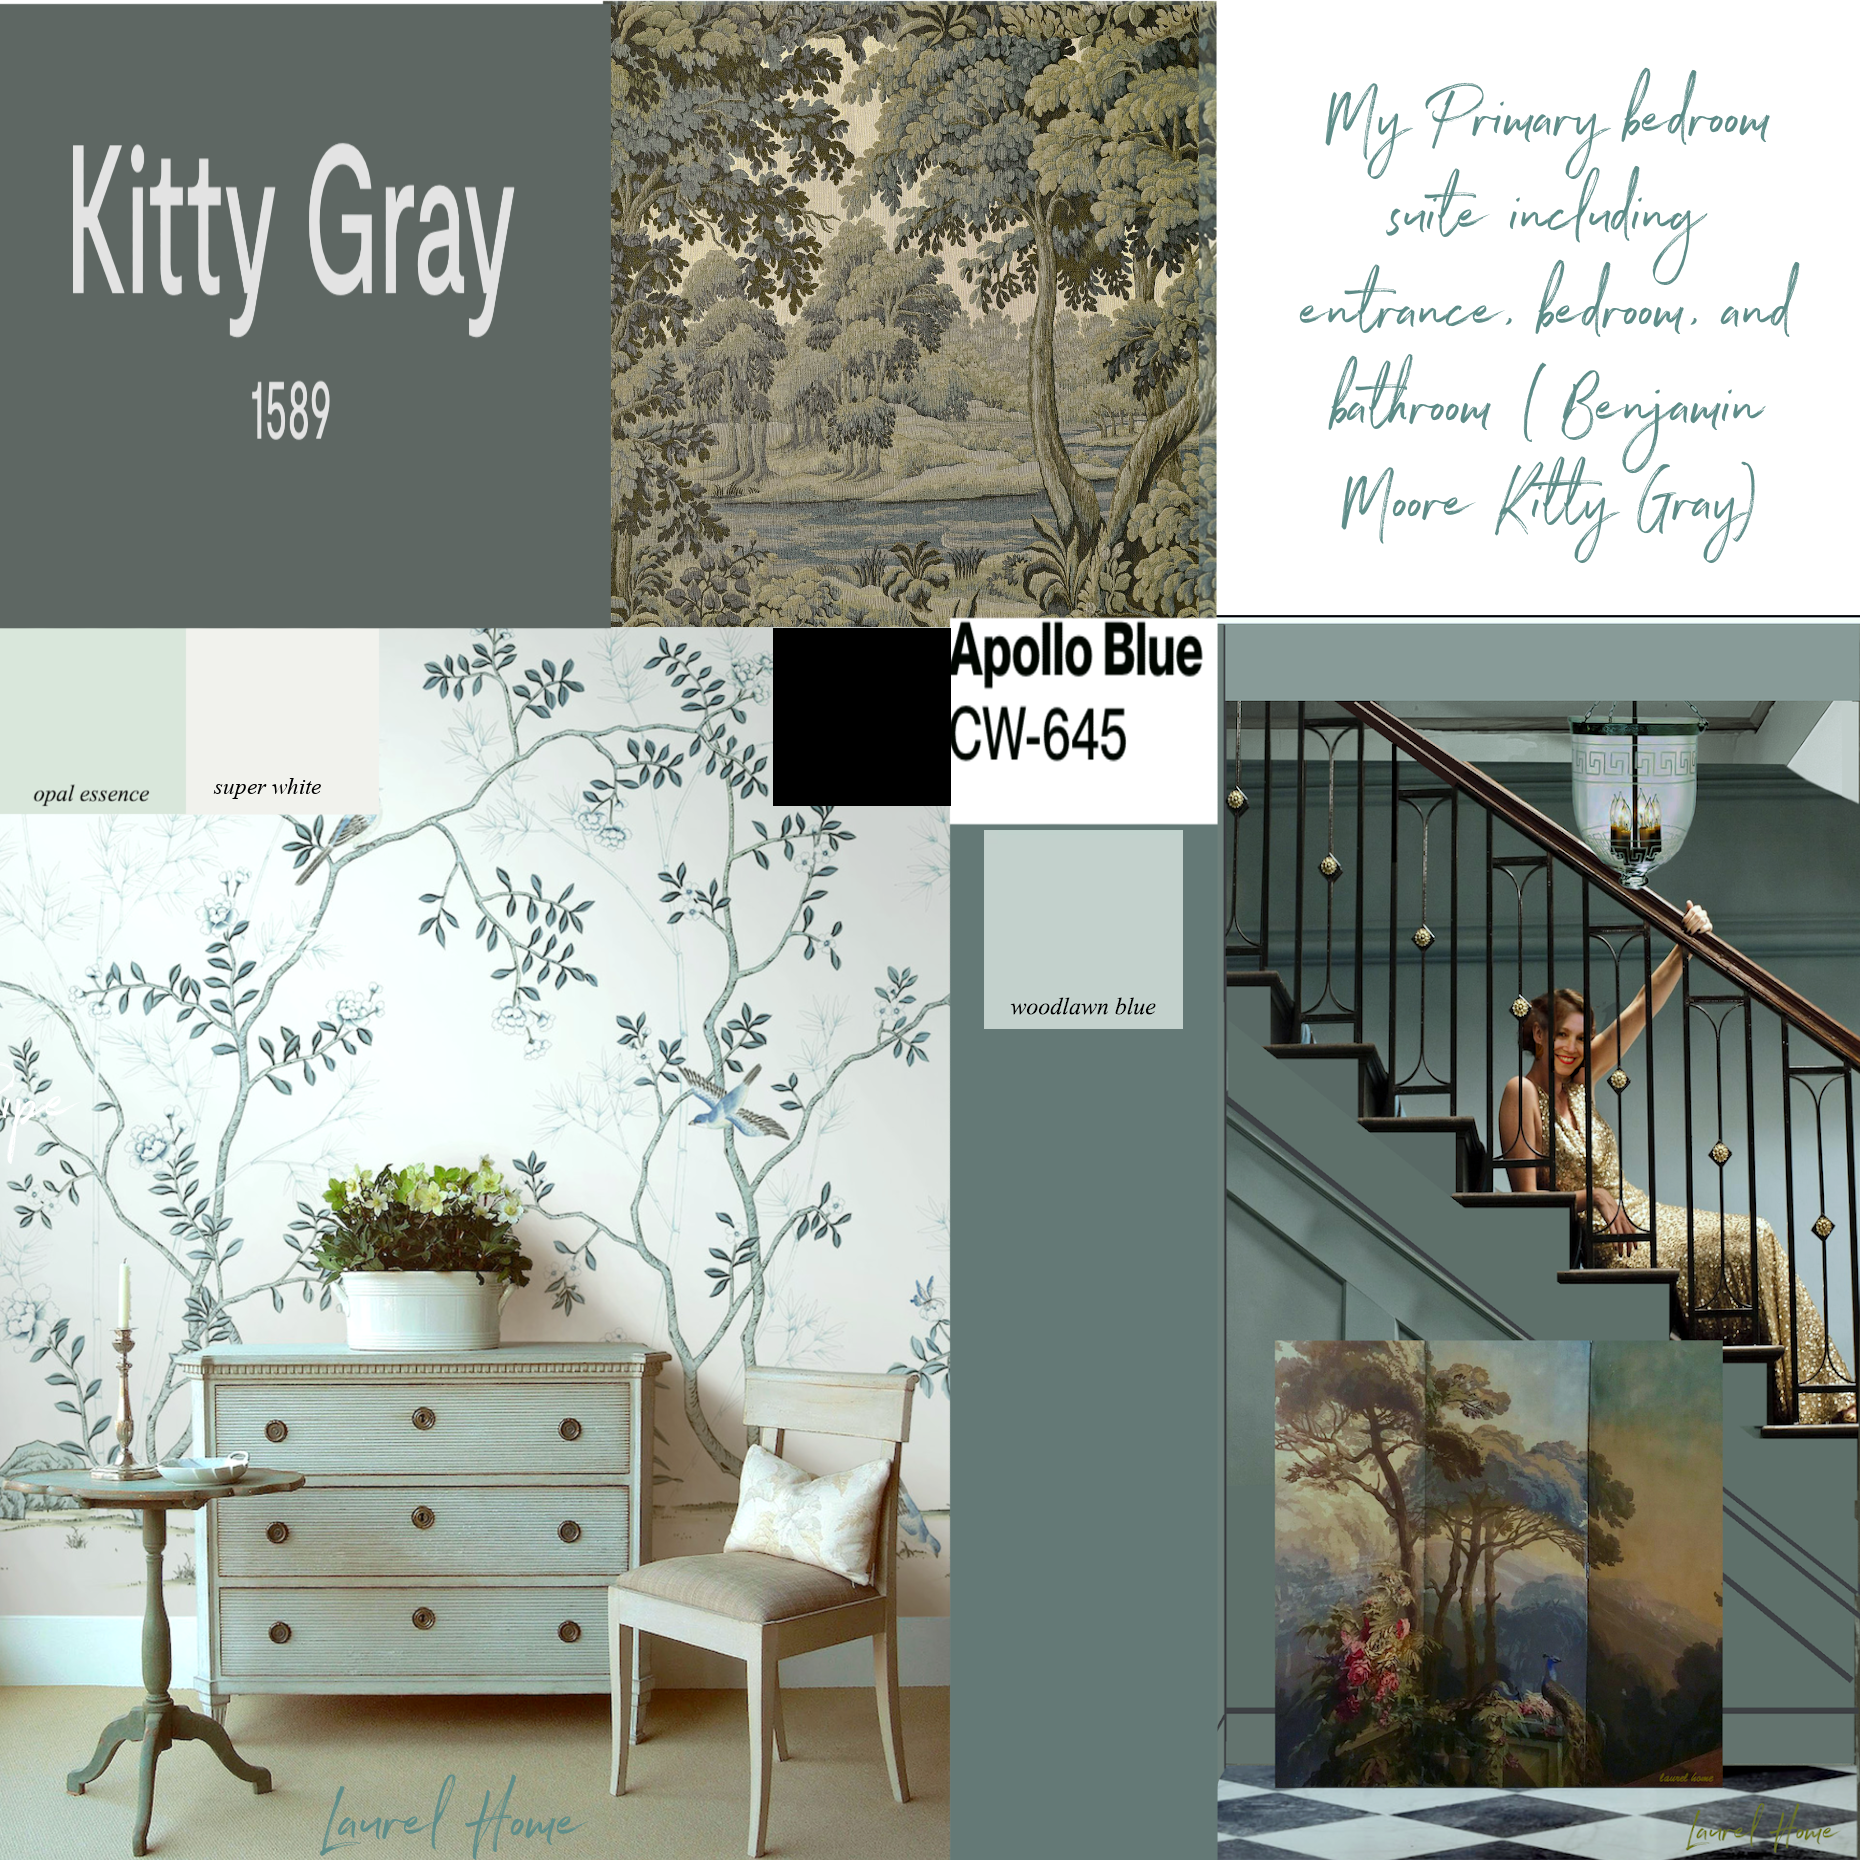 Primary bedroom suite color scheme Kitty Gray - finalizing paint colors